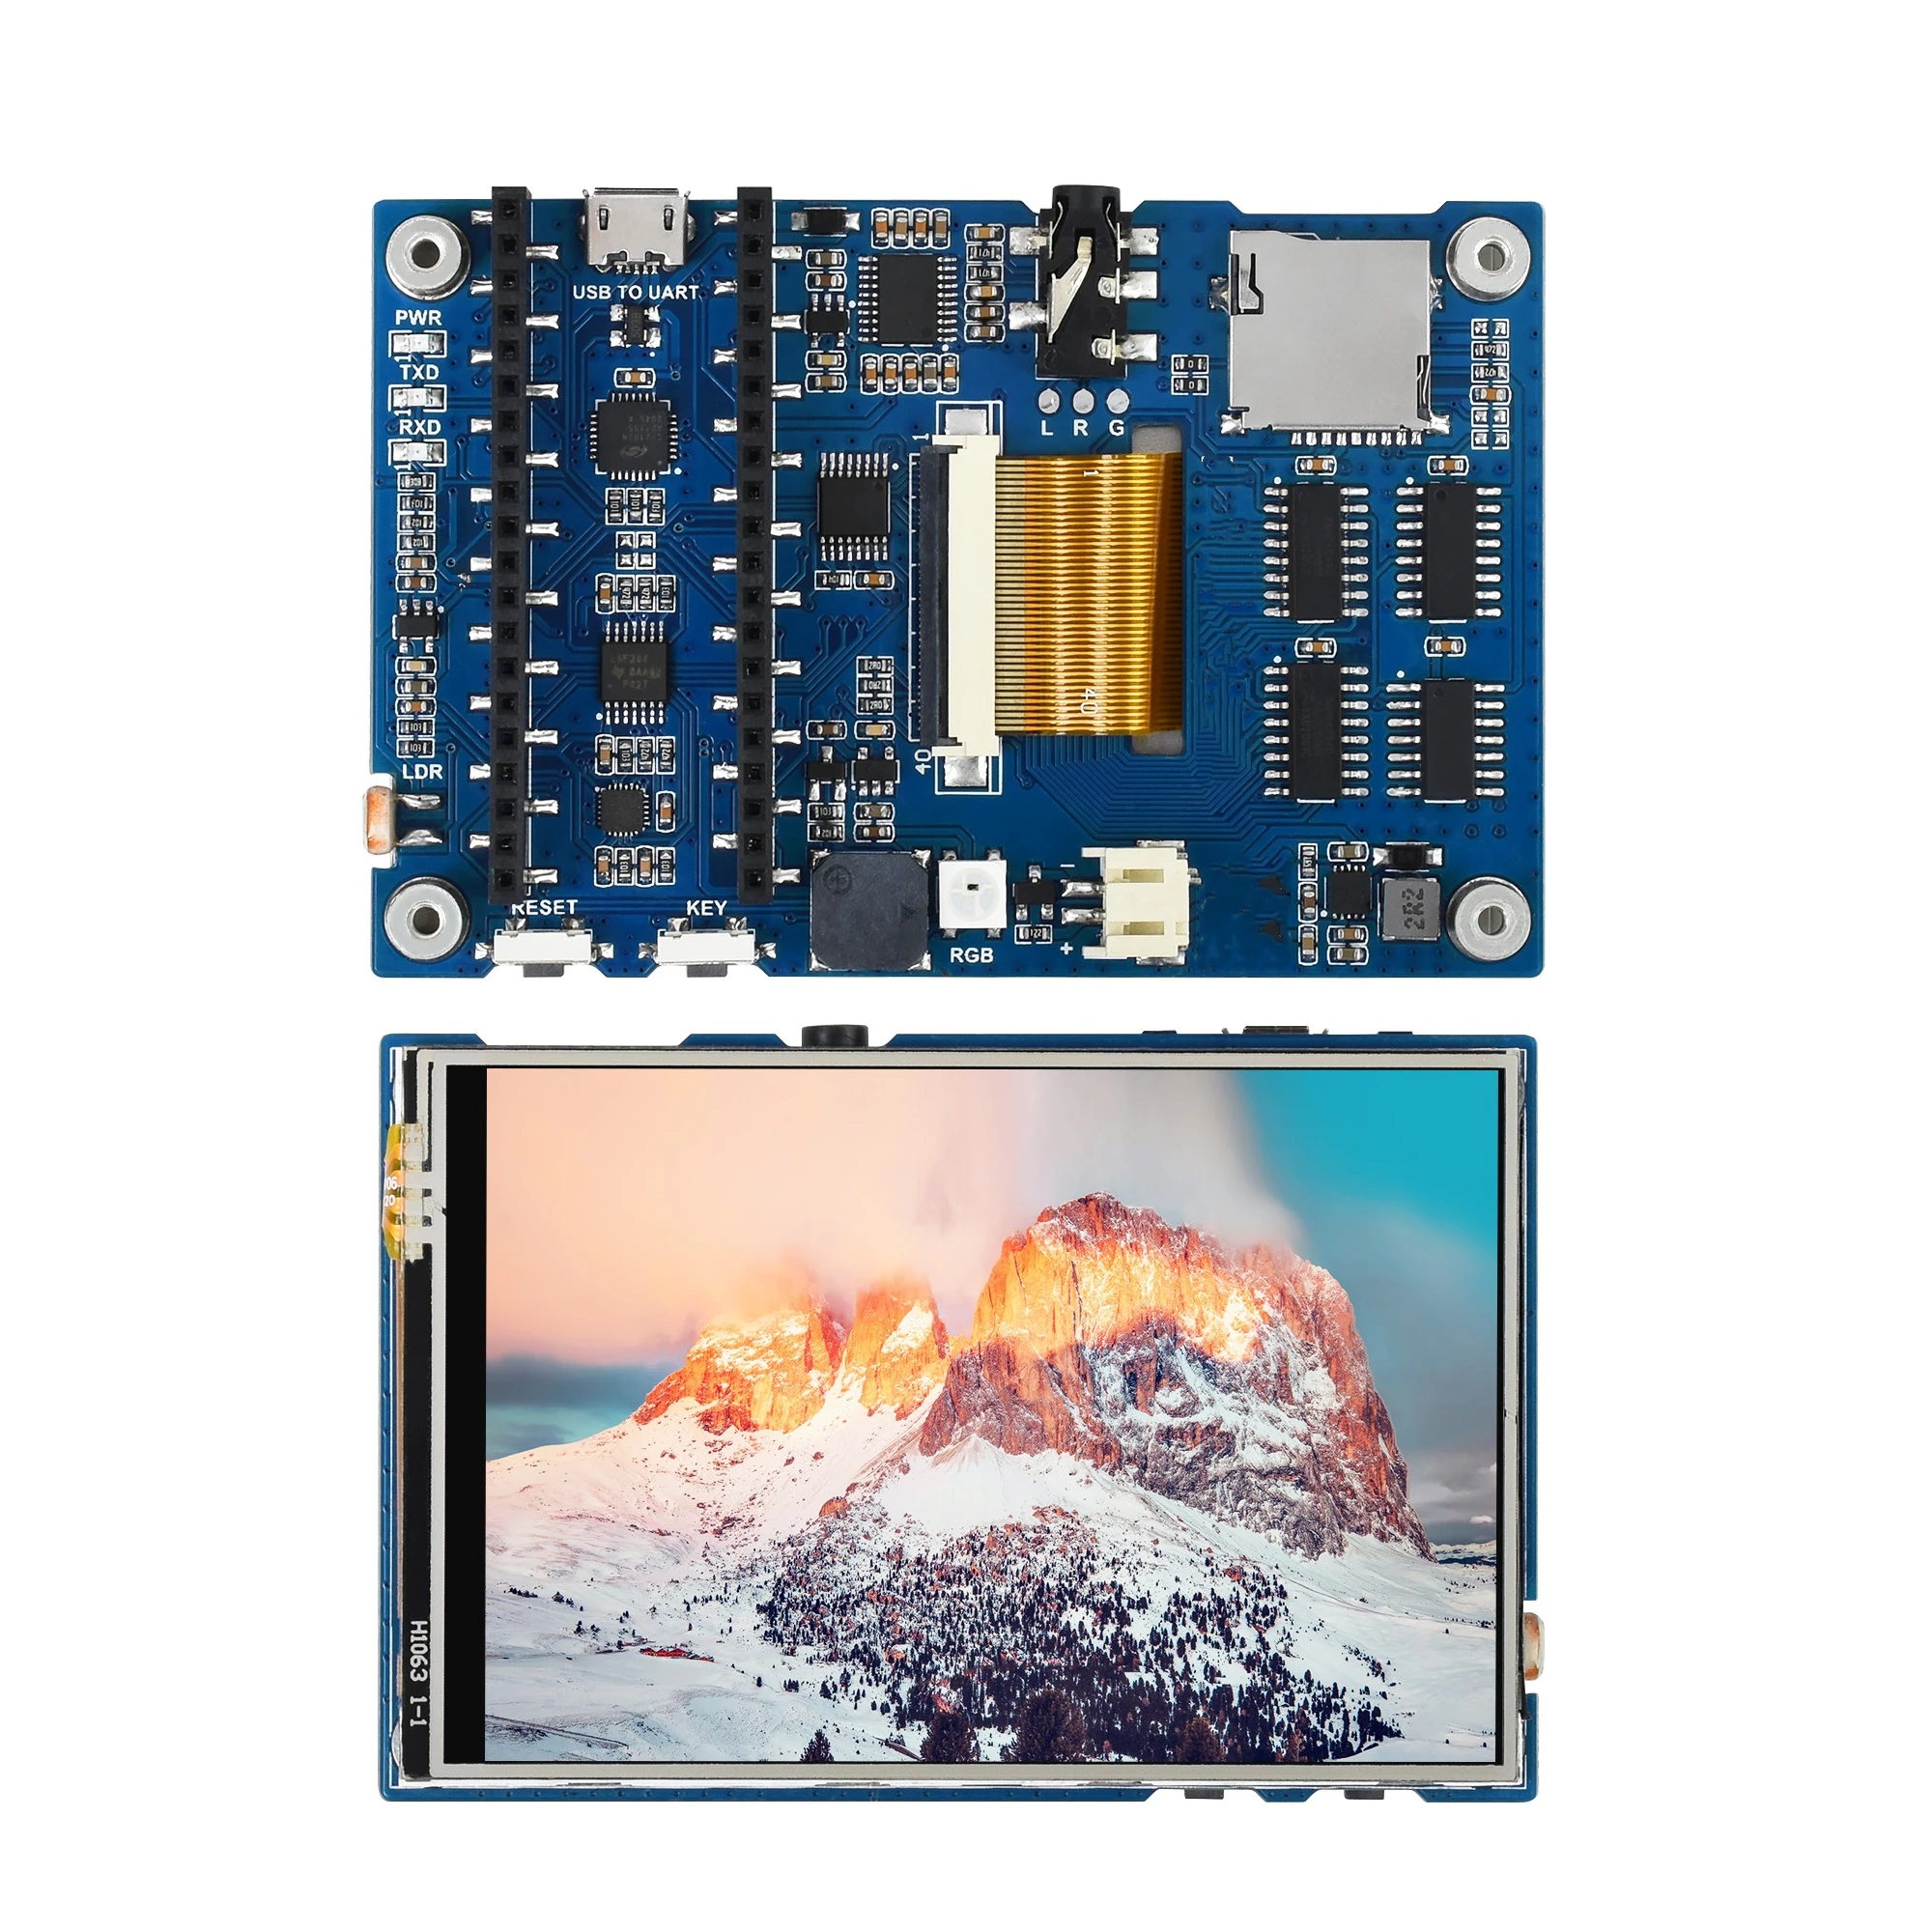 Pico evaluation board, rich on-board RP2040 on-chip peripheral, 65K color IPS screen, 3.5mm audio interface, Micro SD card slot